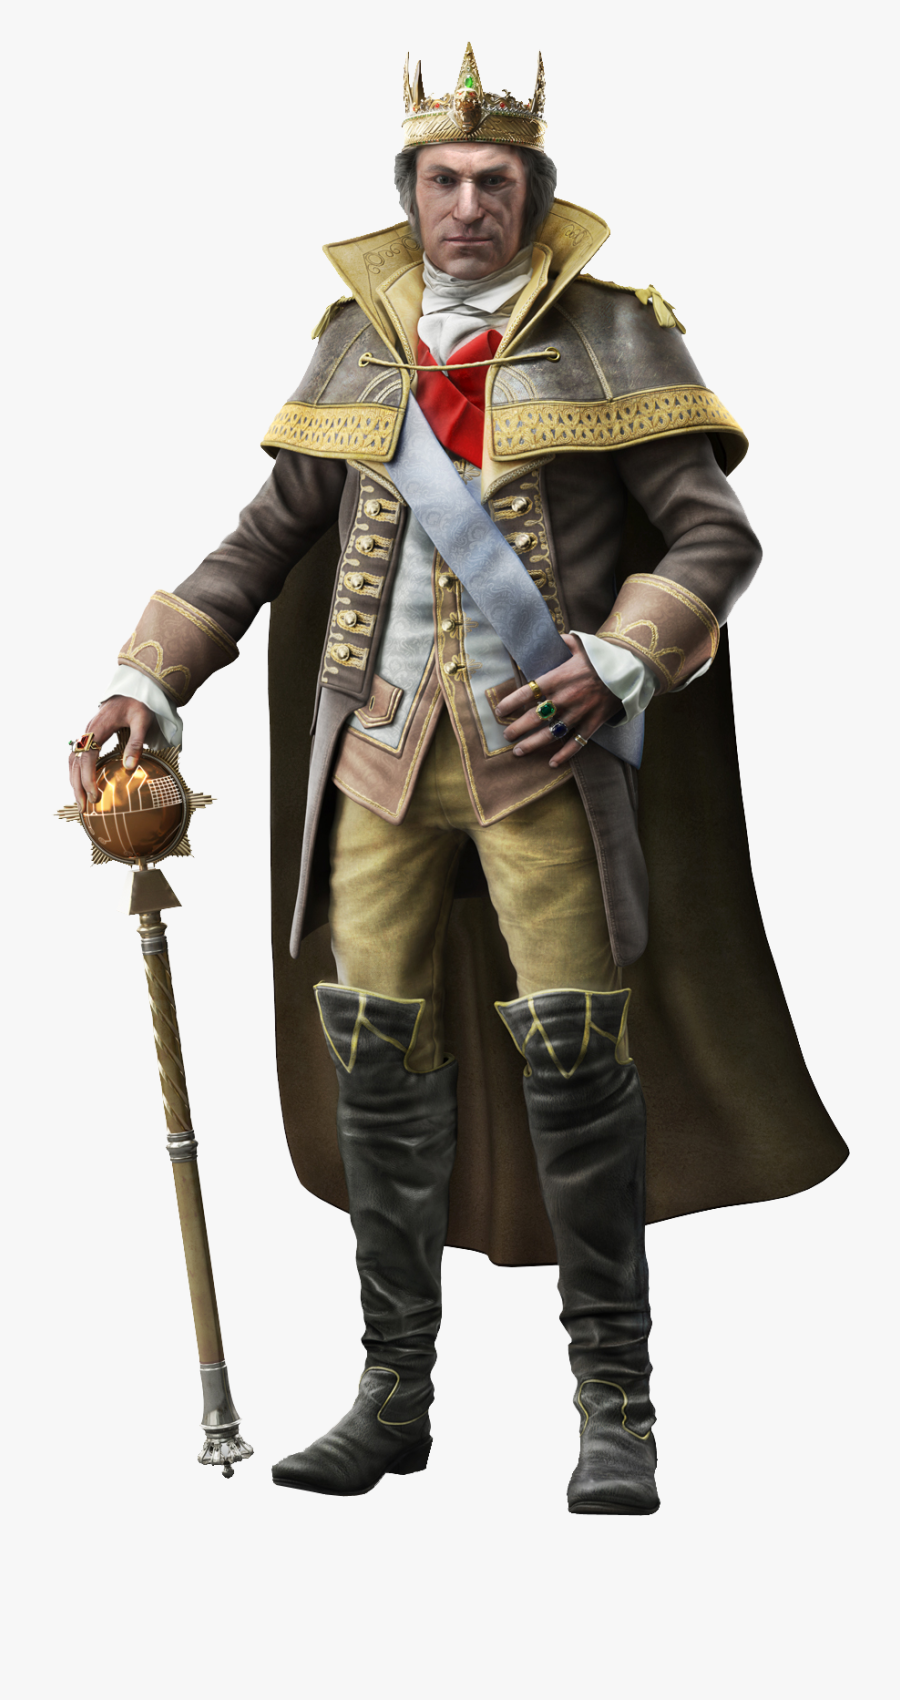 George Washington Png Image With Transparent Background - King George Washington Assassin's Creed, Transparent Clipart